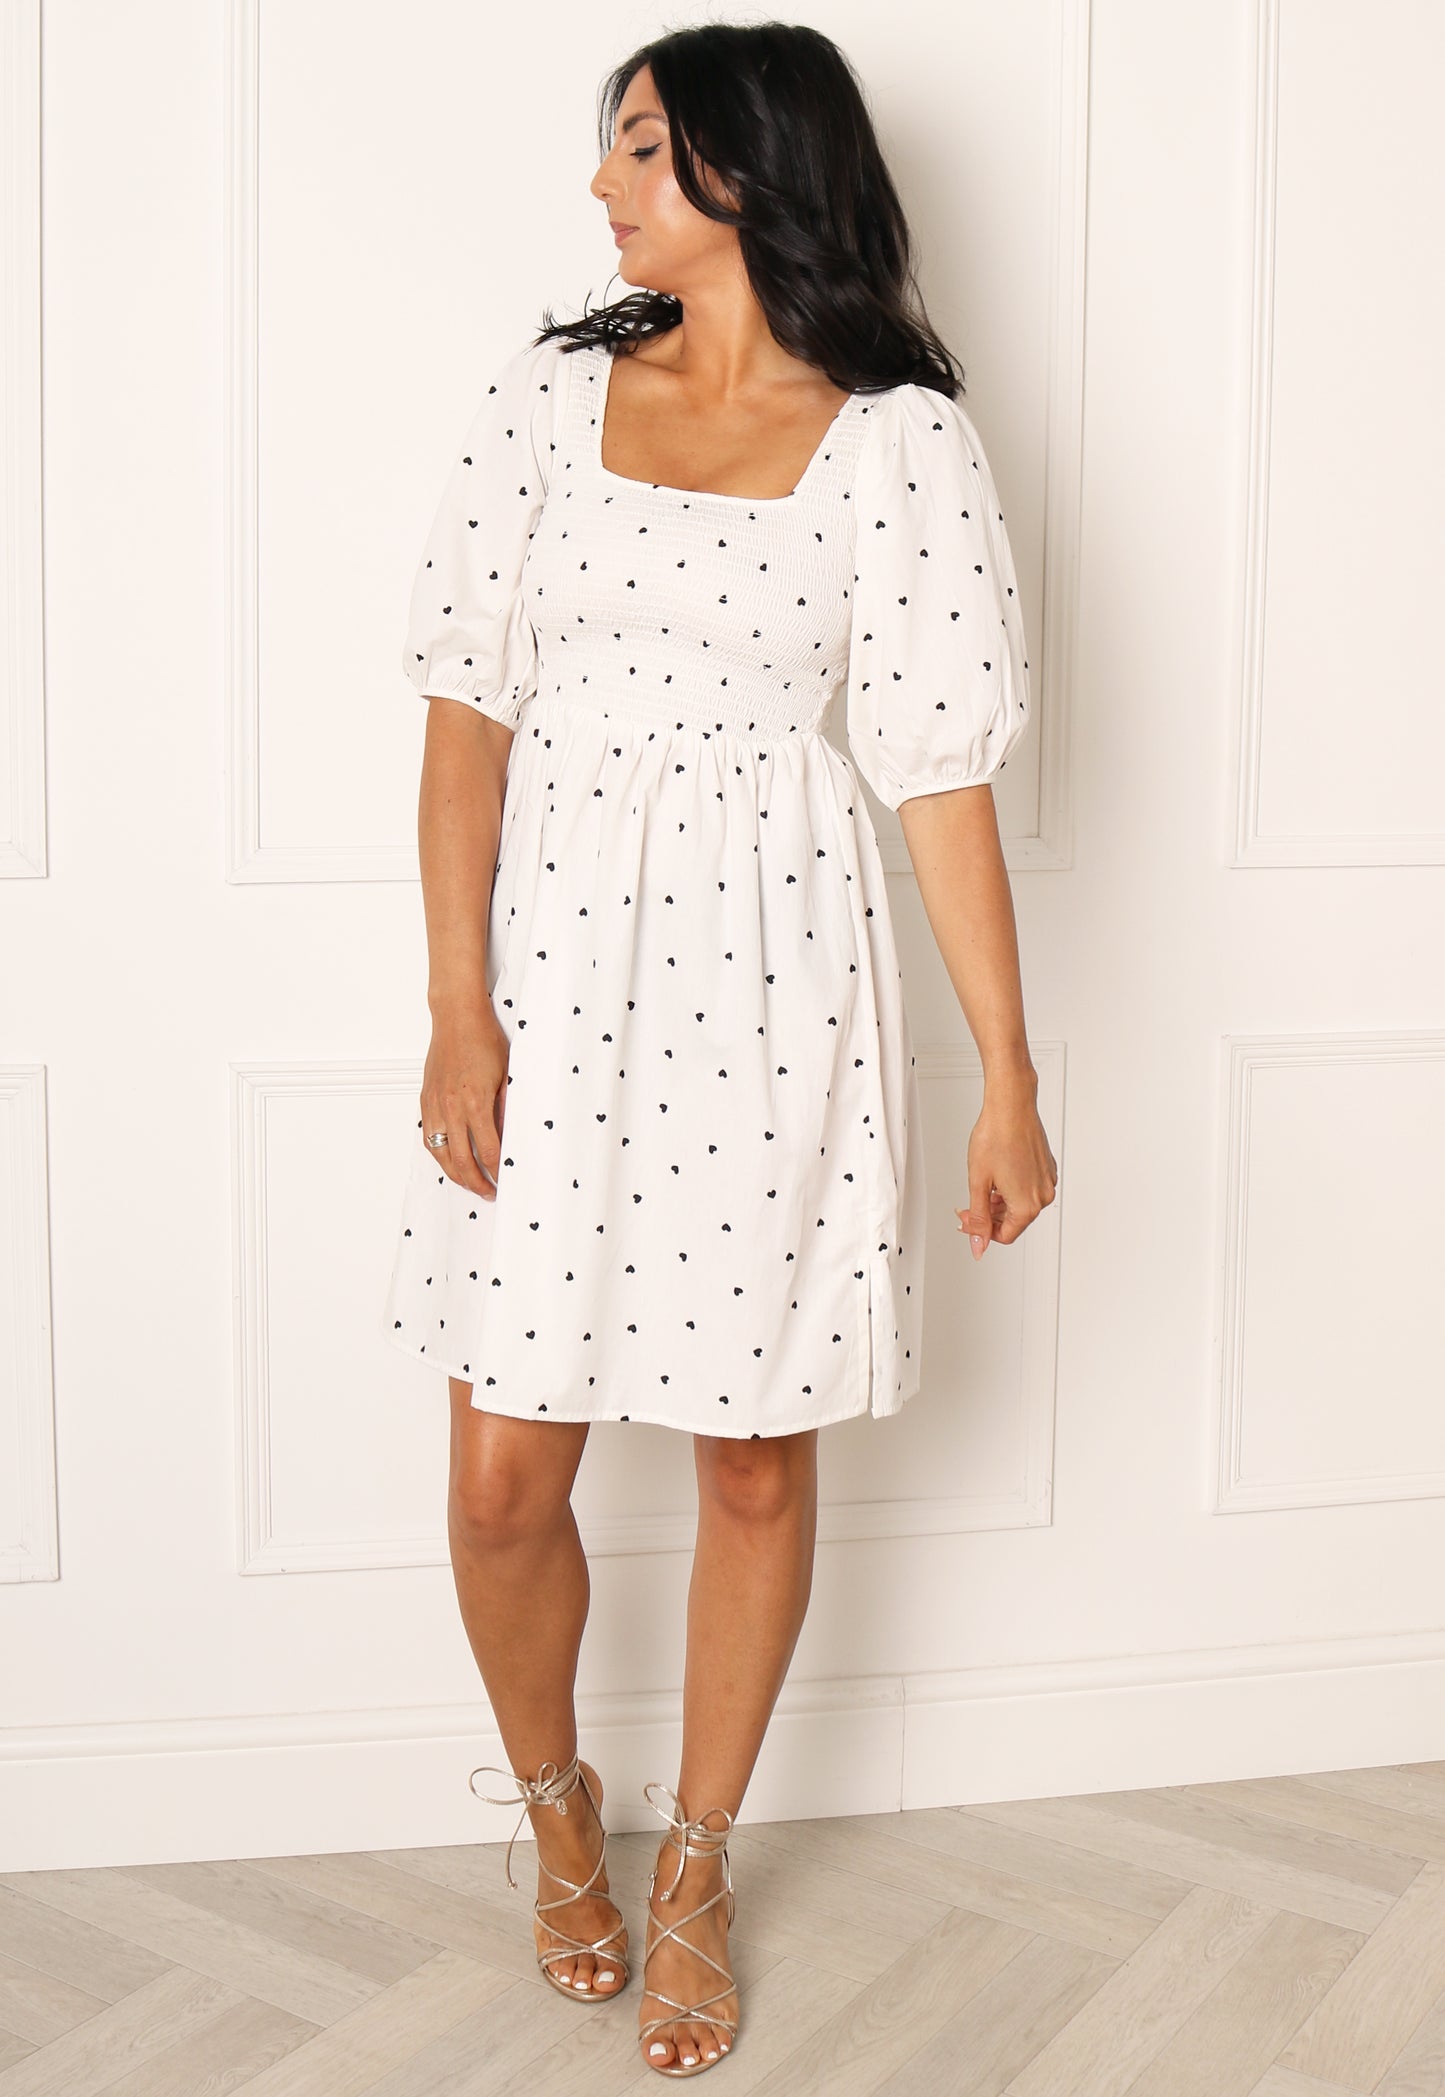 
                  
                    ONLY Brooklyn Heart Print Shirred Top Cotton Mini Dress in White & Black - One Nation Clothing
                  
                